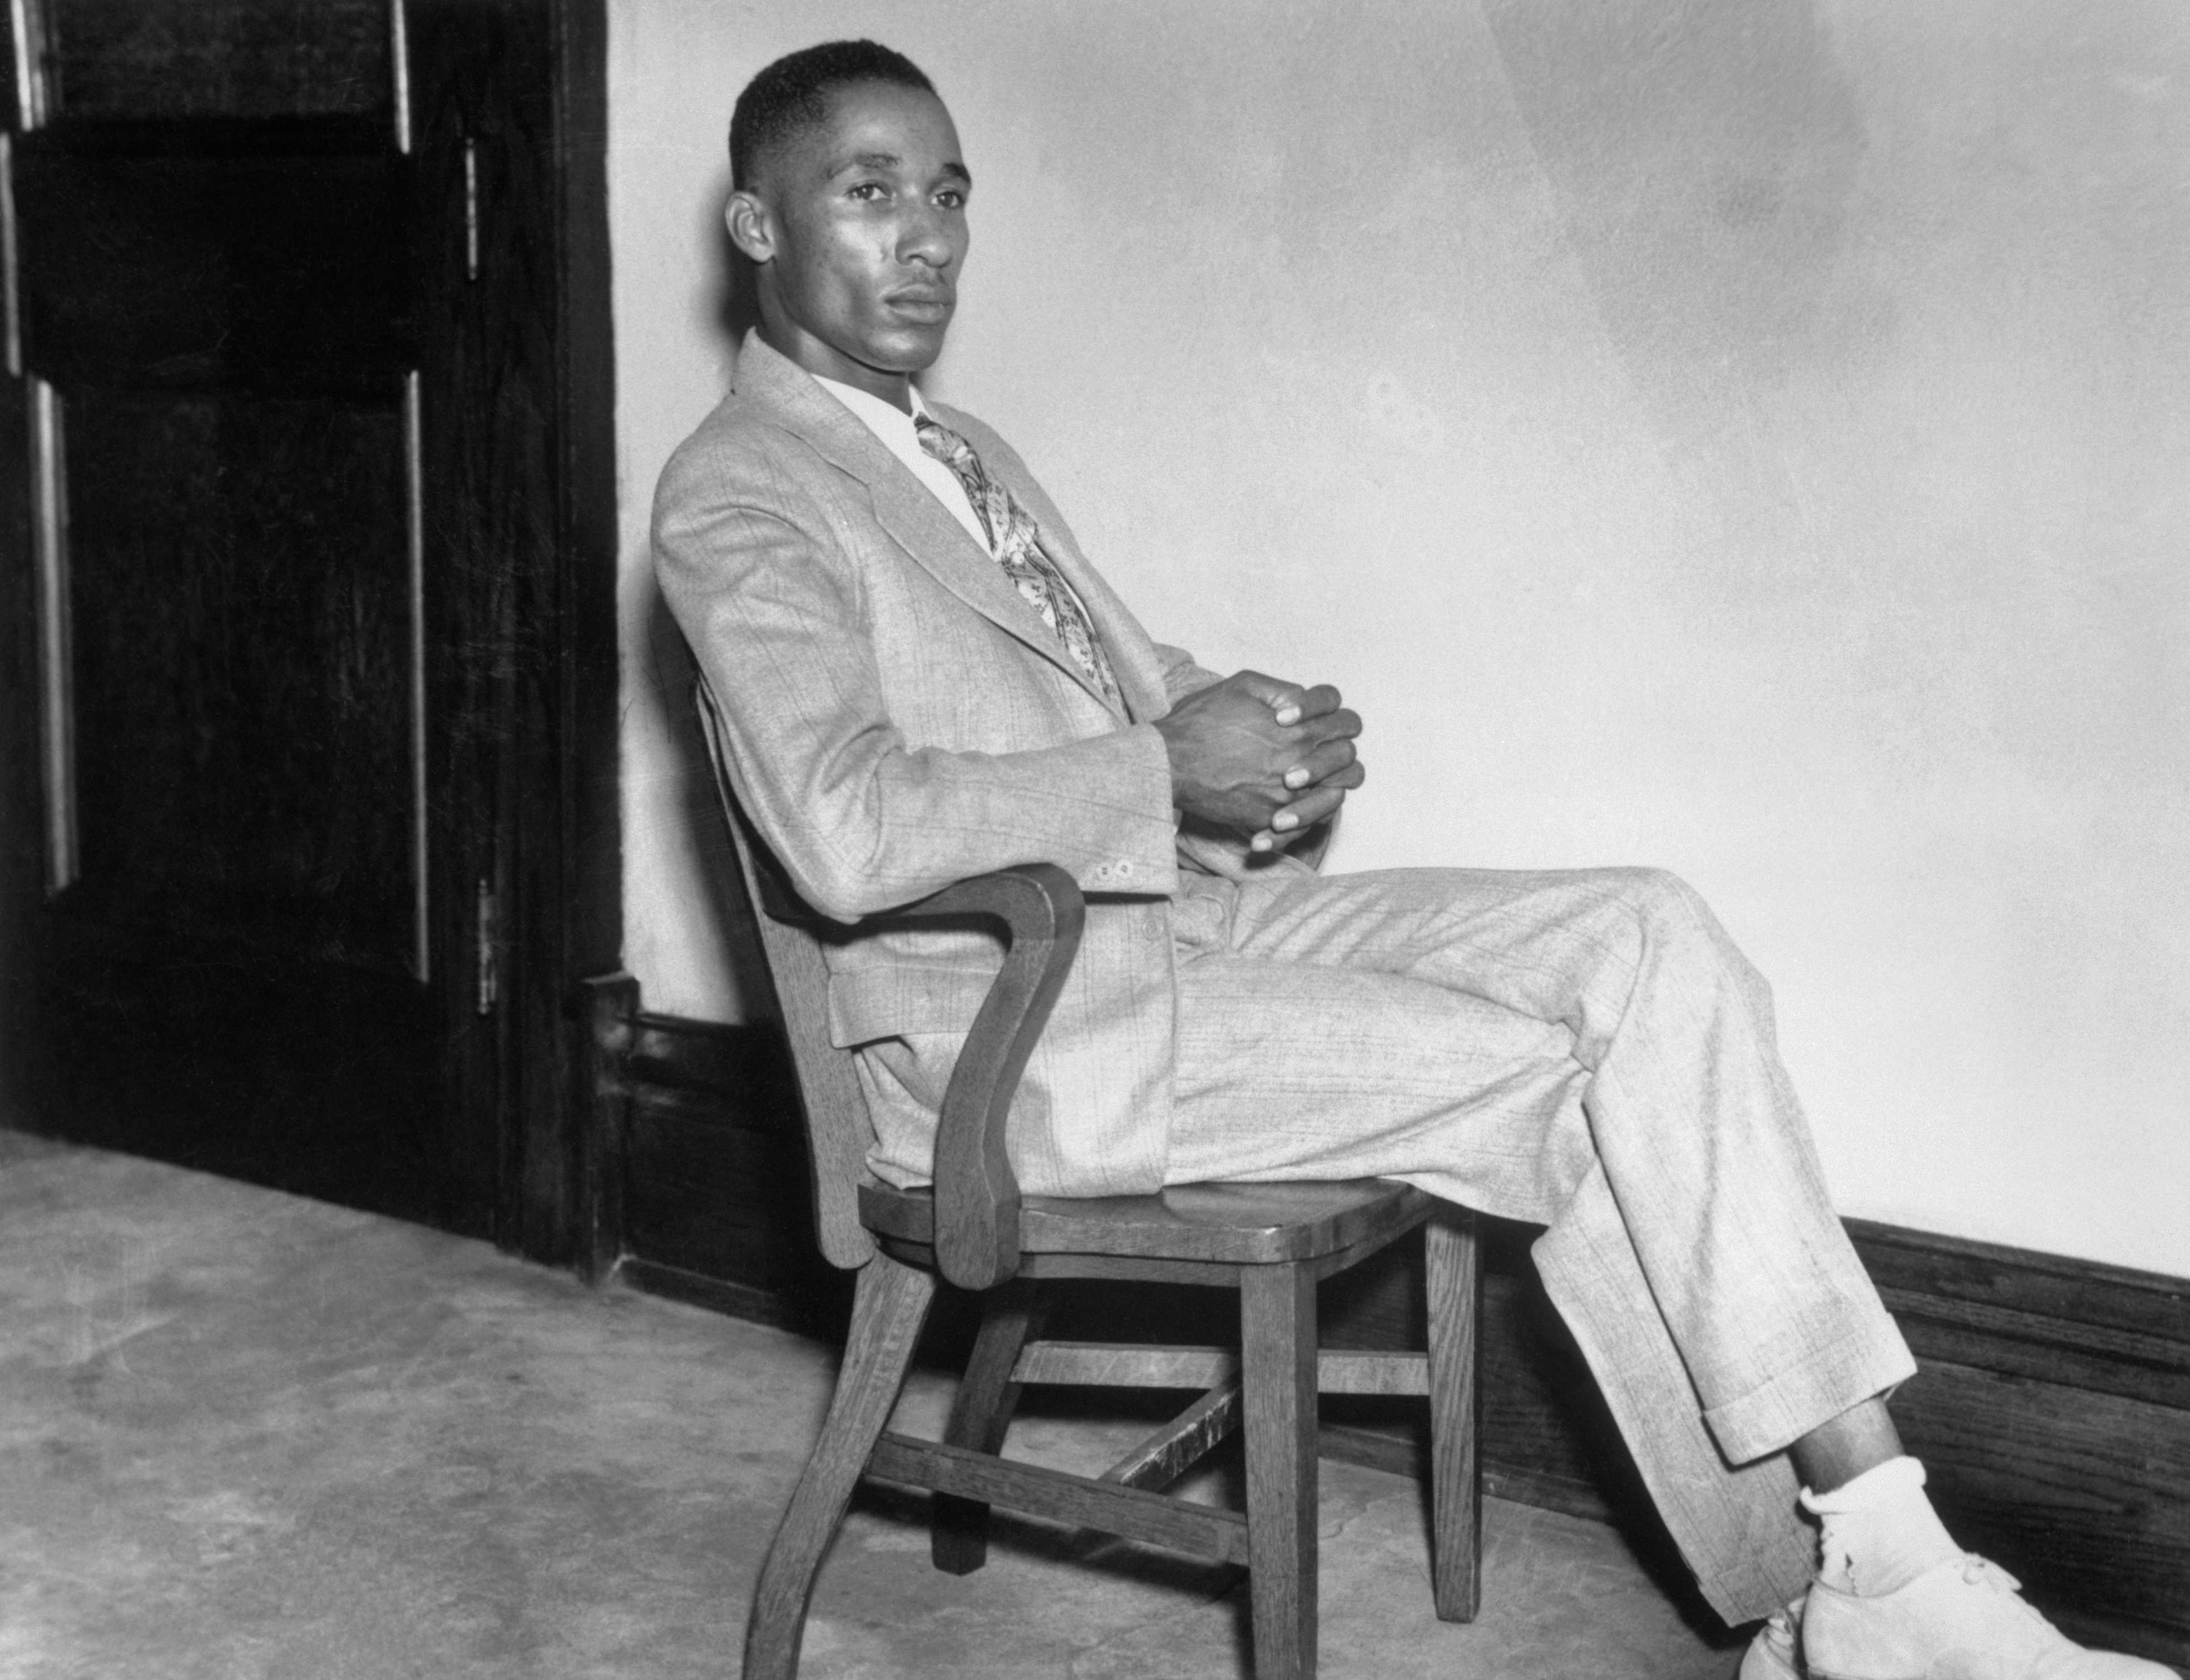 Black and white photograph of Black man seated in a wooden chair with crossed legs and hands folded in lap.  He is wearing a light colored suit and patterned neck tie.